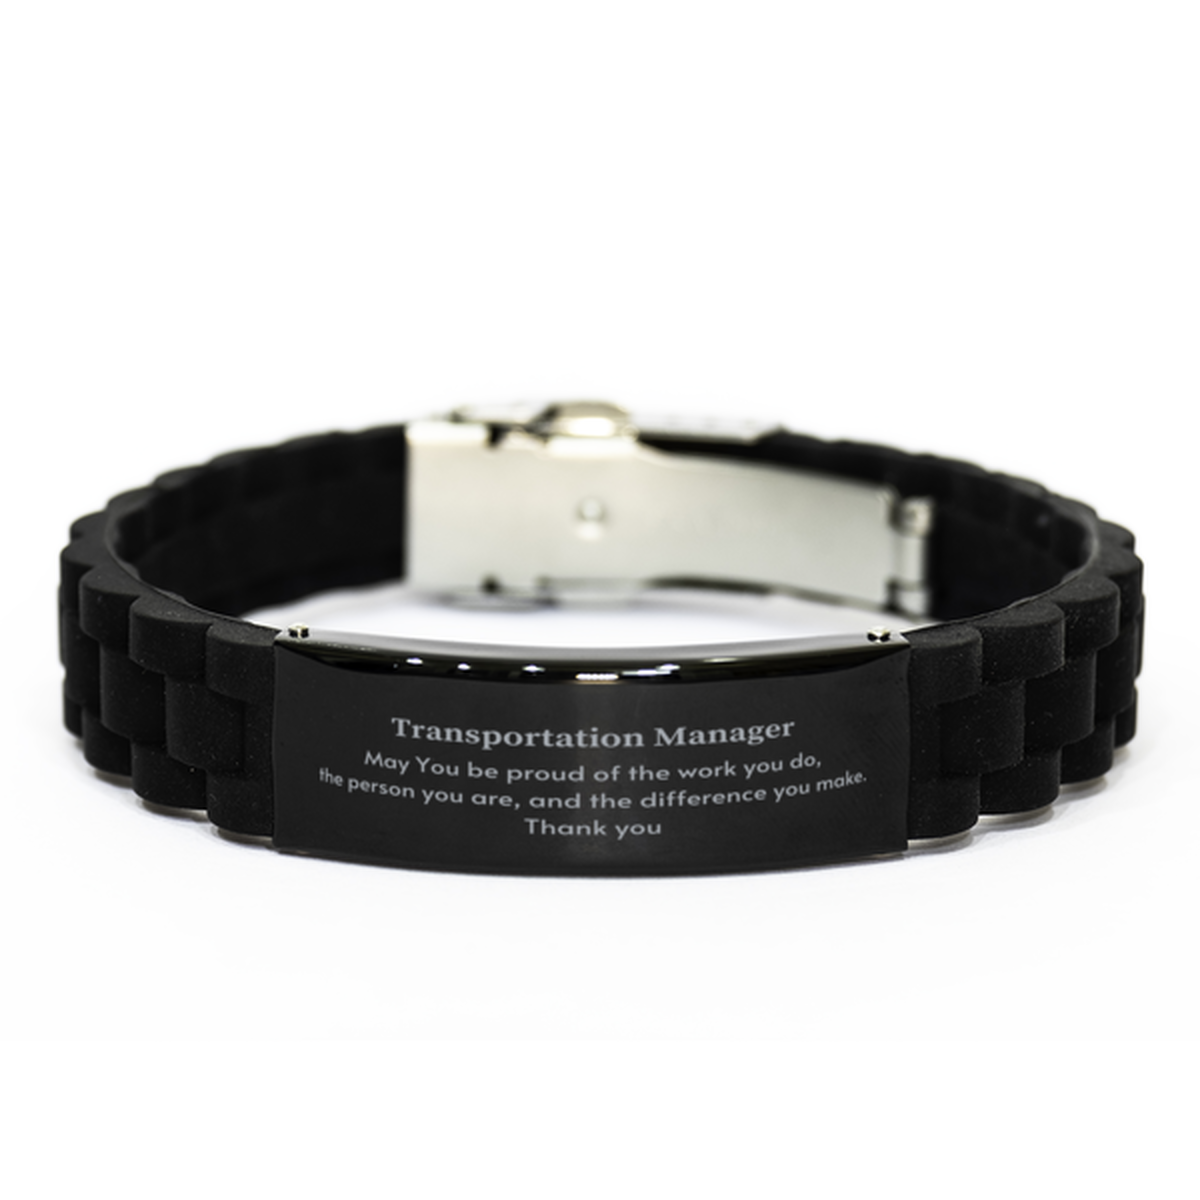 Heartwarming Black Glidelock Clasp Bracelet Retirement Coworkers Gifts for Transportation Manager, Transportation Manager May You be proud of the work you do, the person you are Gifts for Boss Men Women Friends